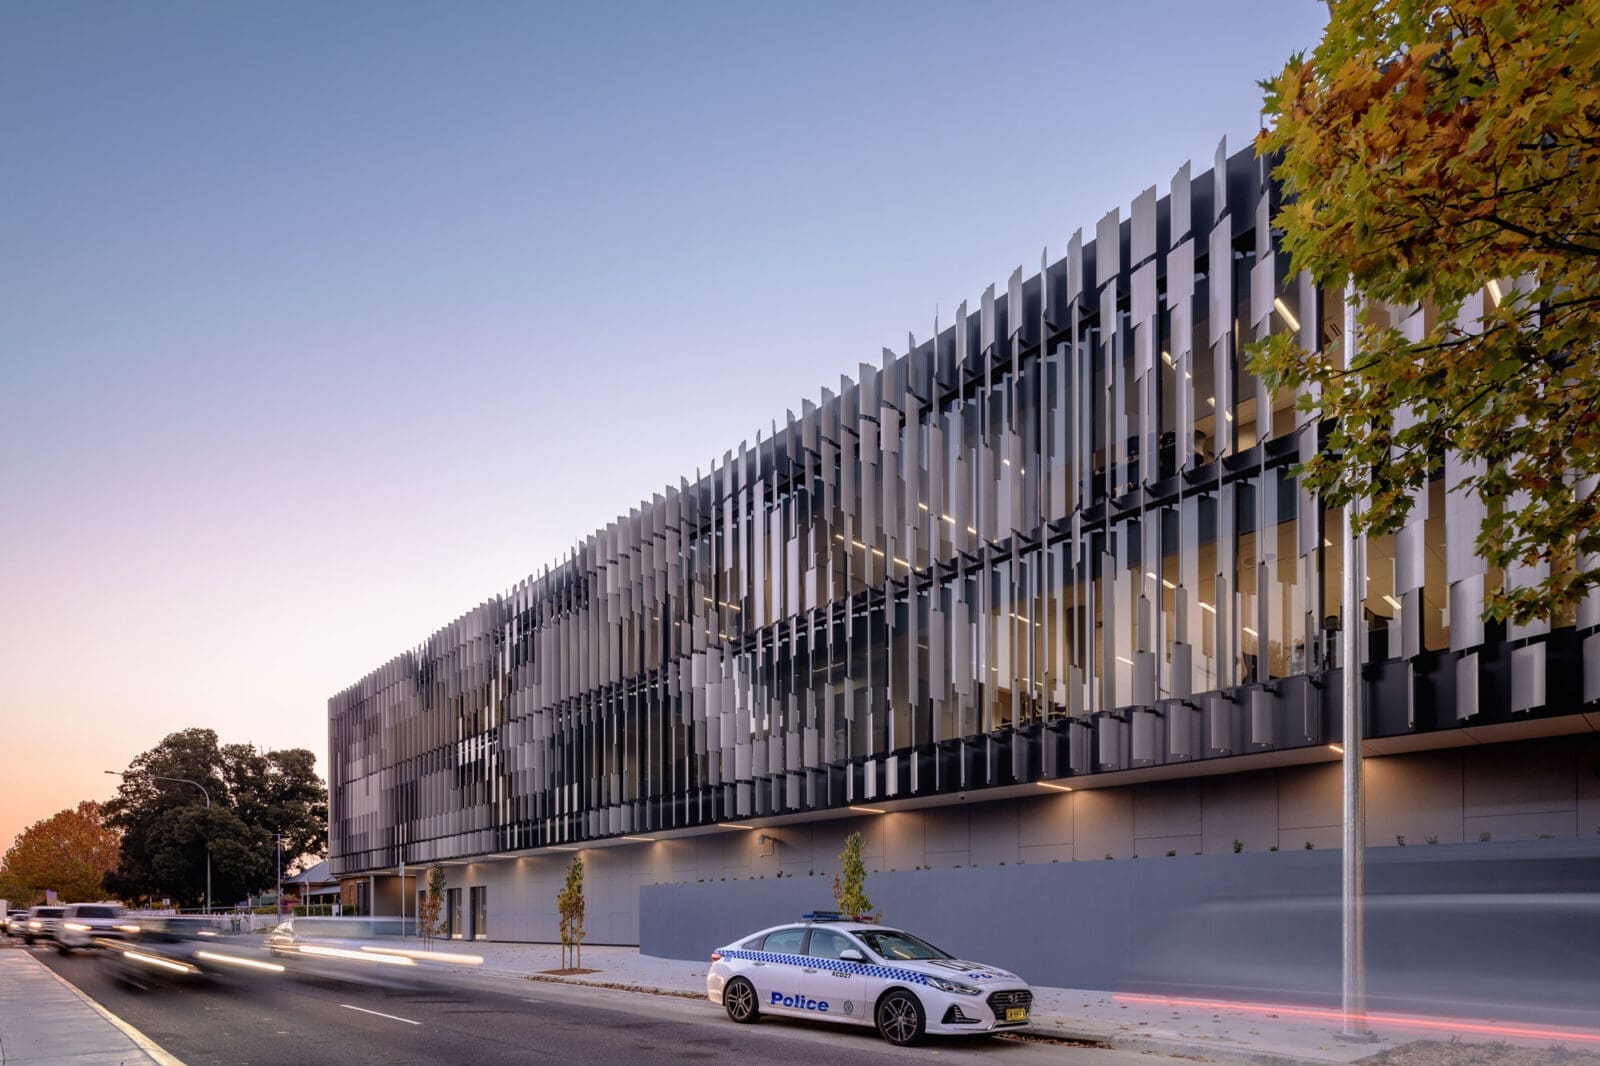 street view of Queanbeyan Police Station